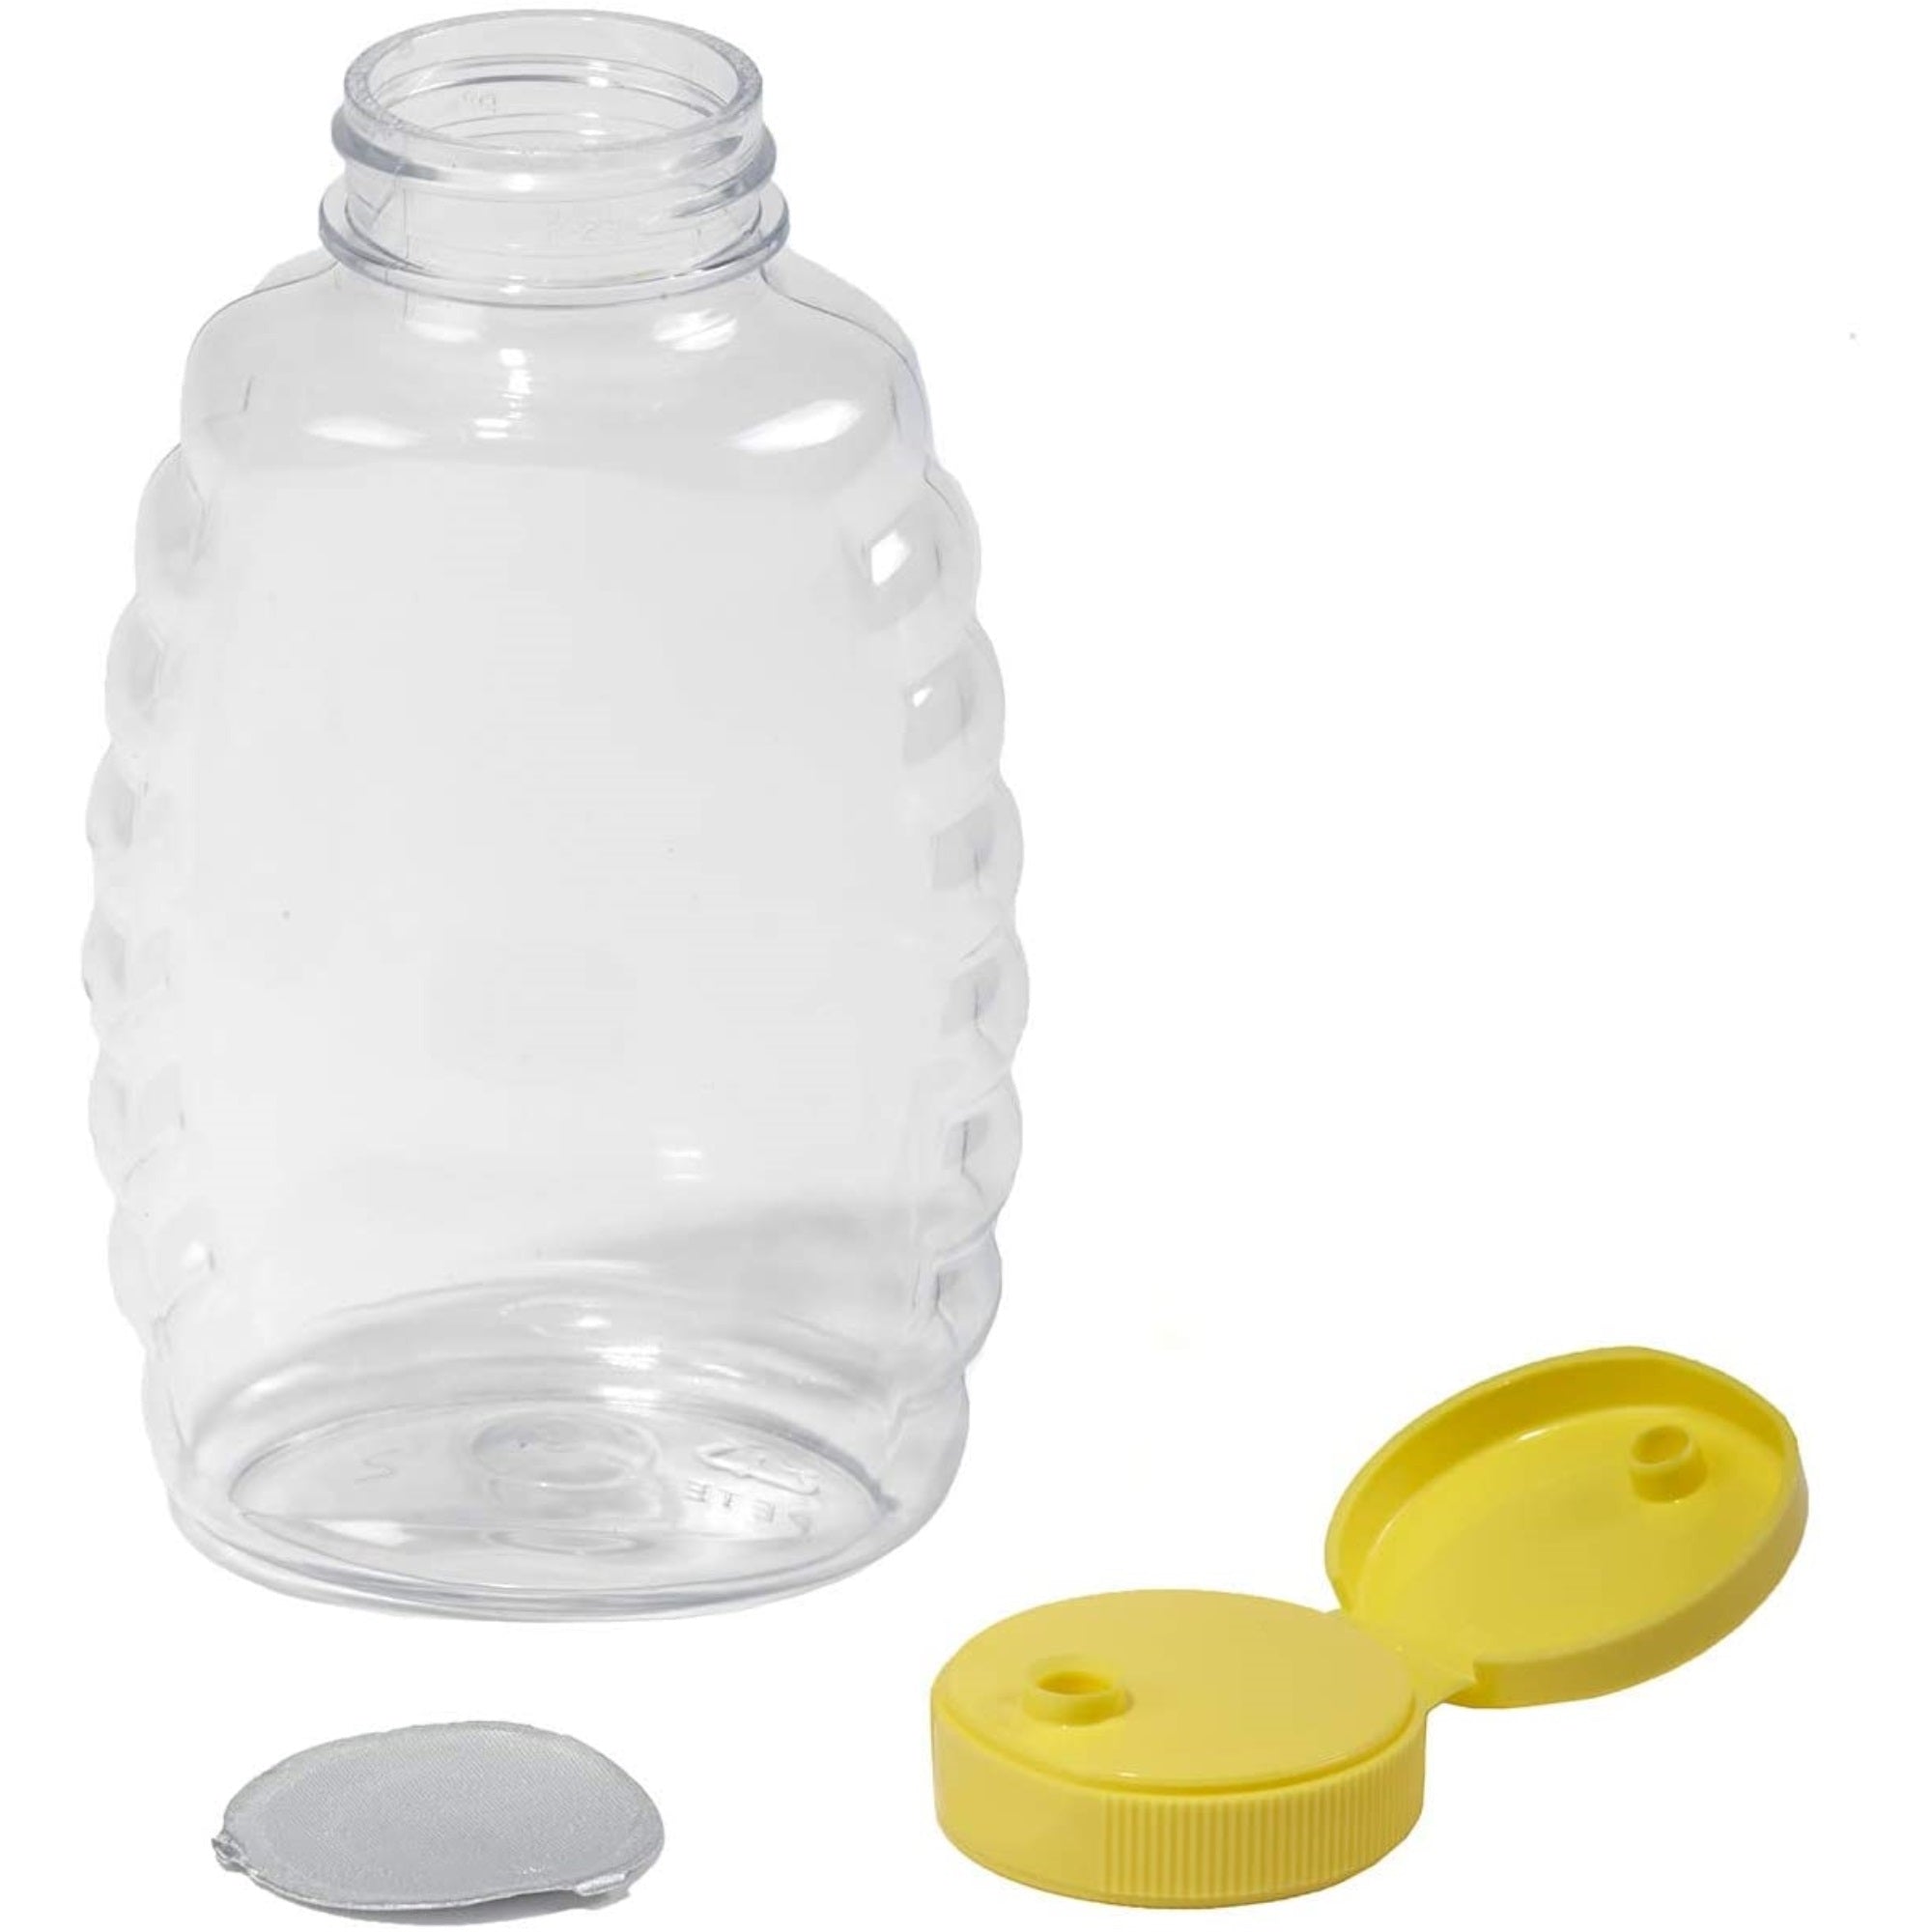 Little Giant Plastic Skep-Style Jar Honey Squeeze Bottle with Flip-top Lid, 16oz (12 Pack)